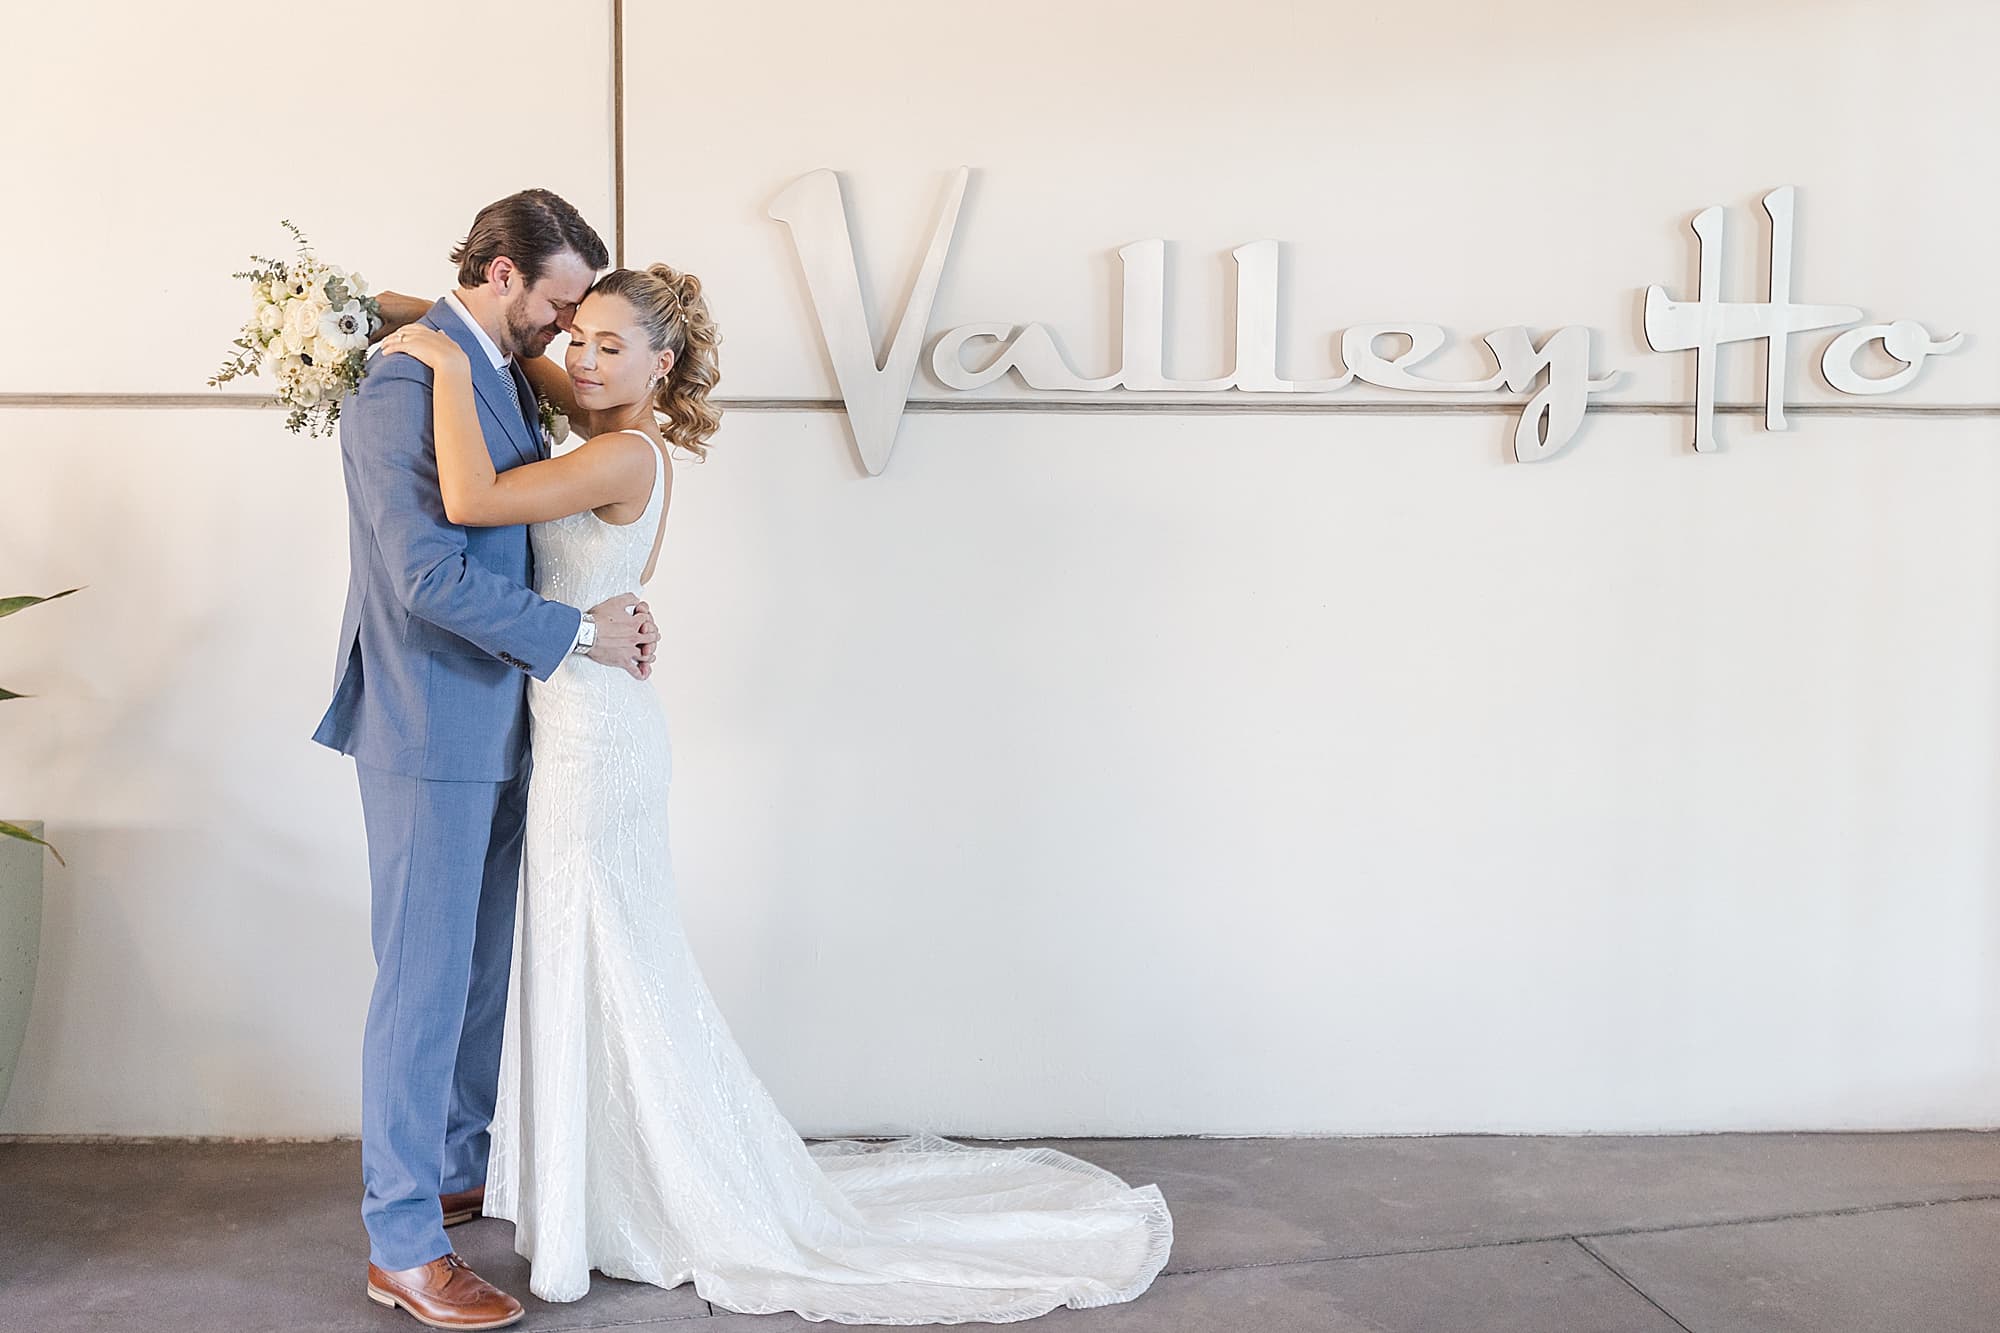 Old Town Scottsdale Wedding at Hotel Valley Ho